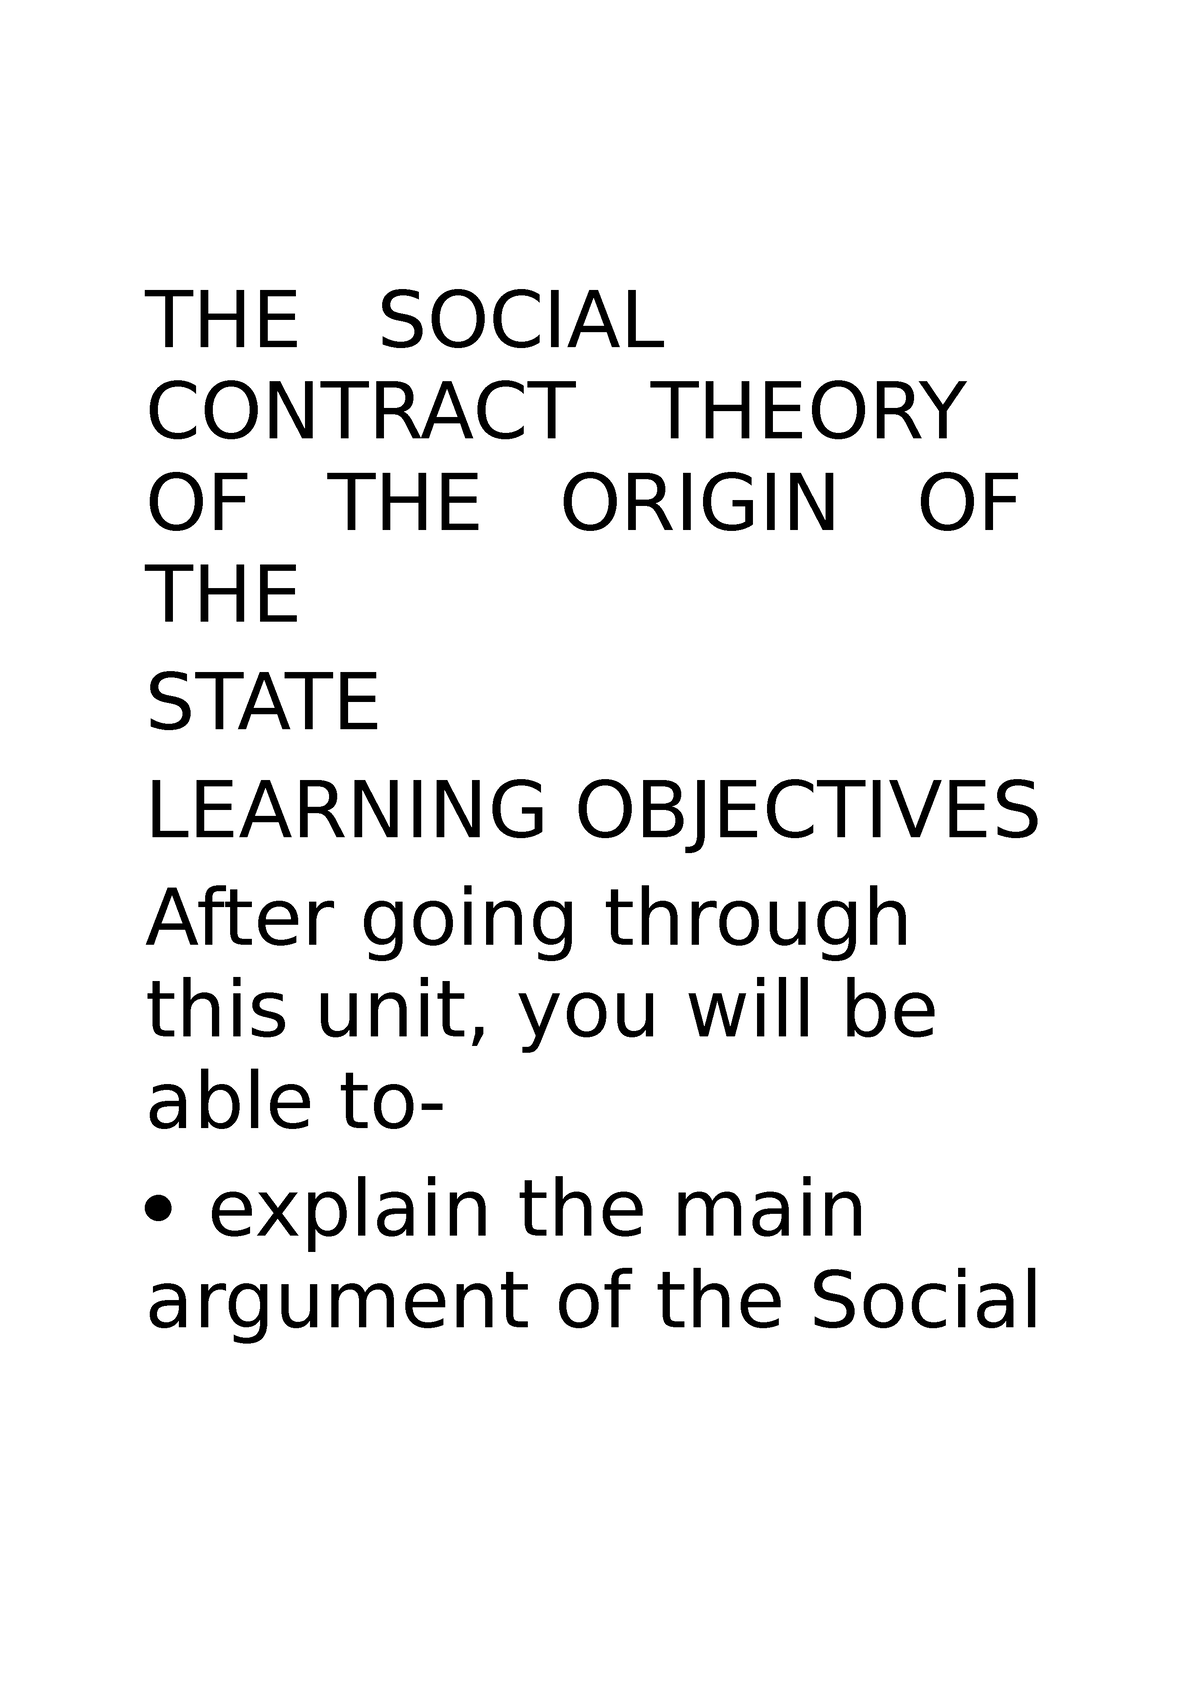 essay on social contract theory of origin of state